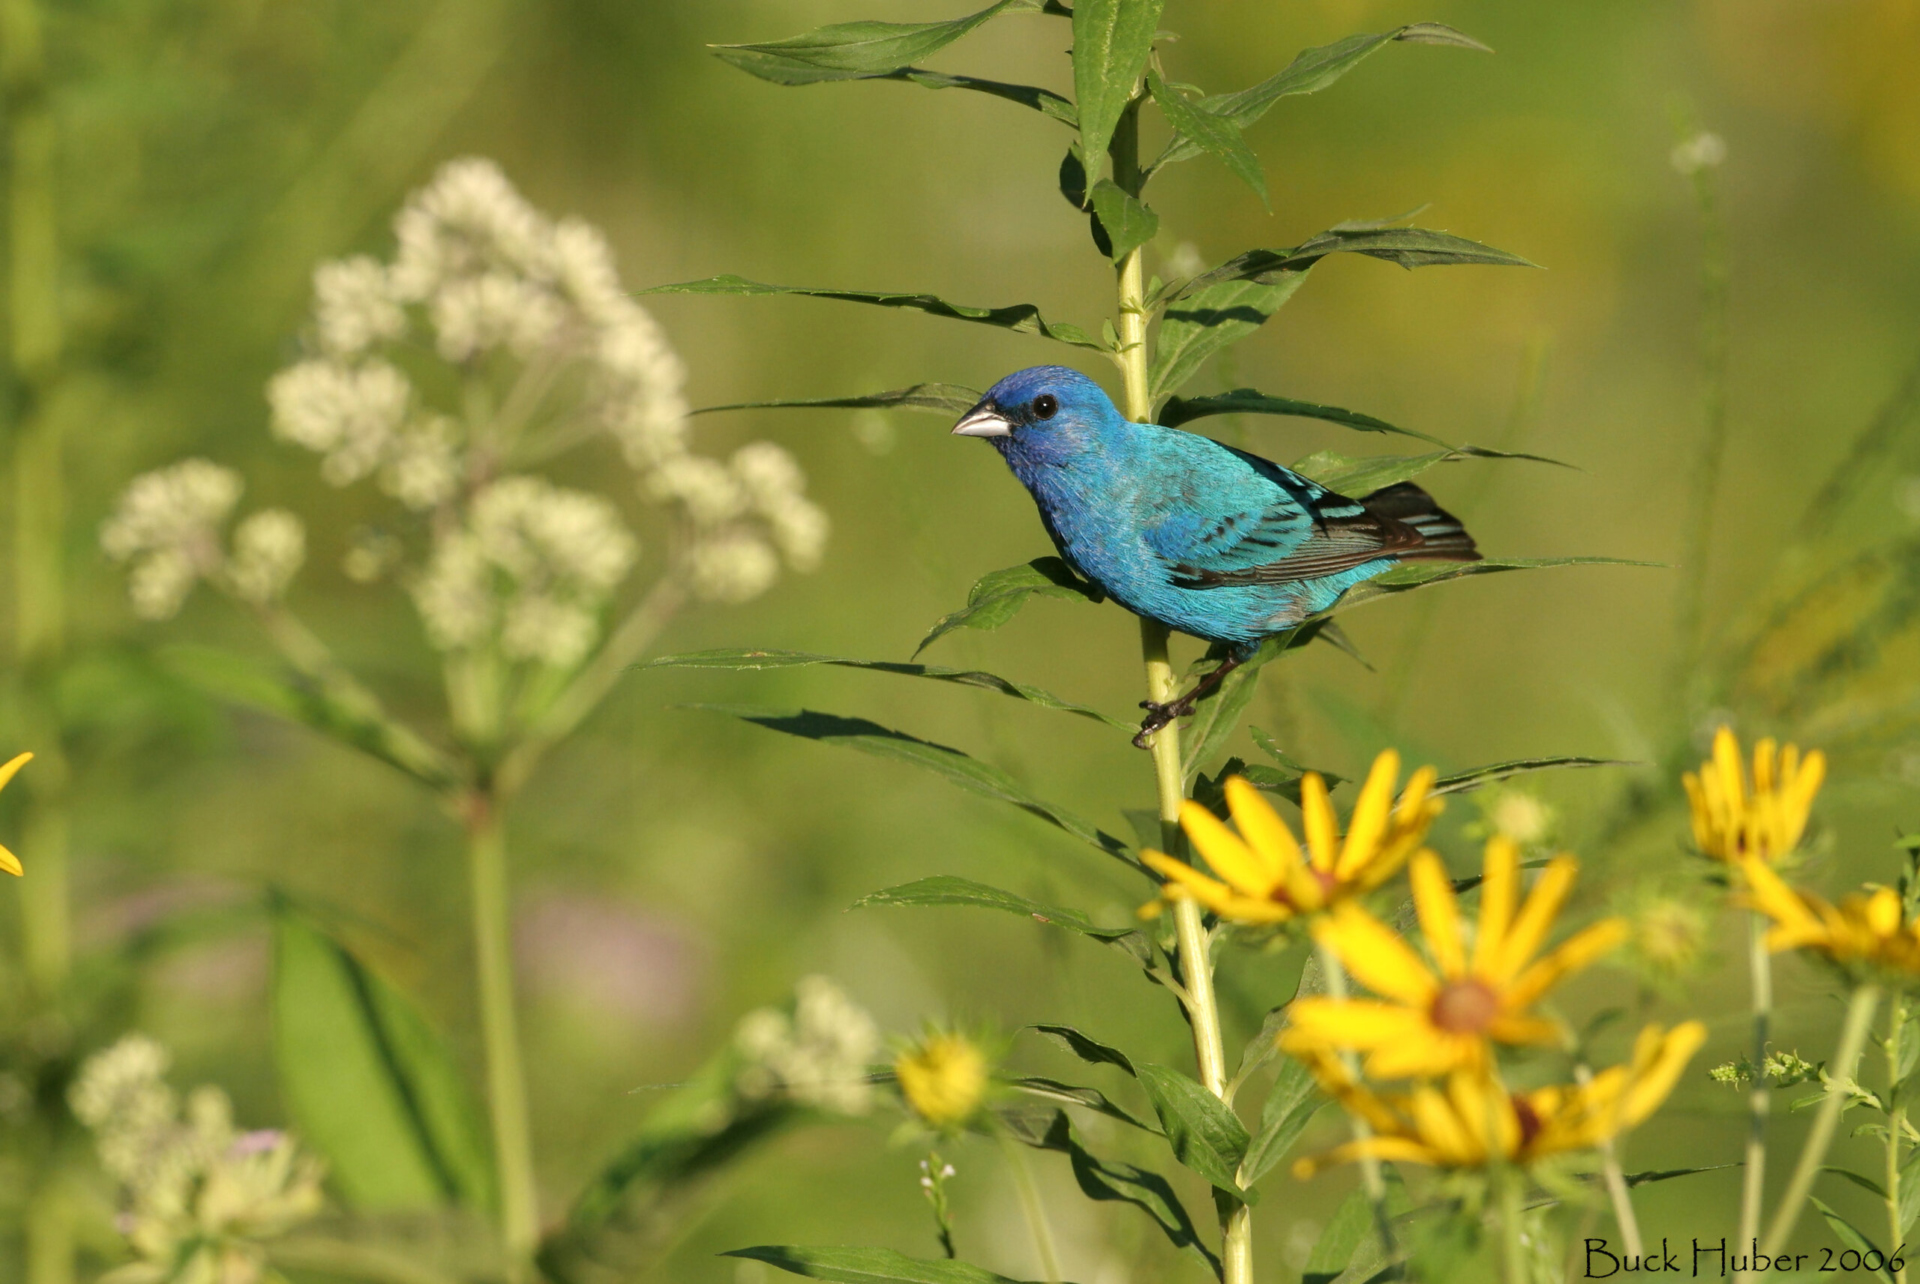 An Indigo Bunting perched on a flower stalk, drawing birds class.